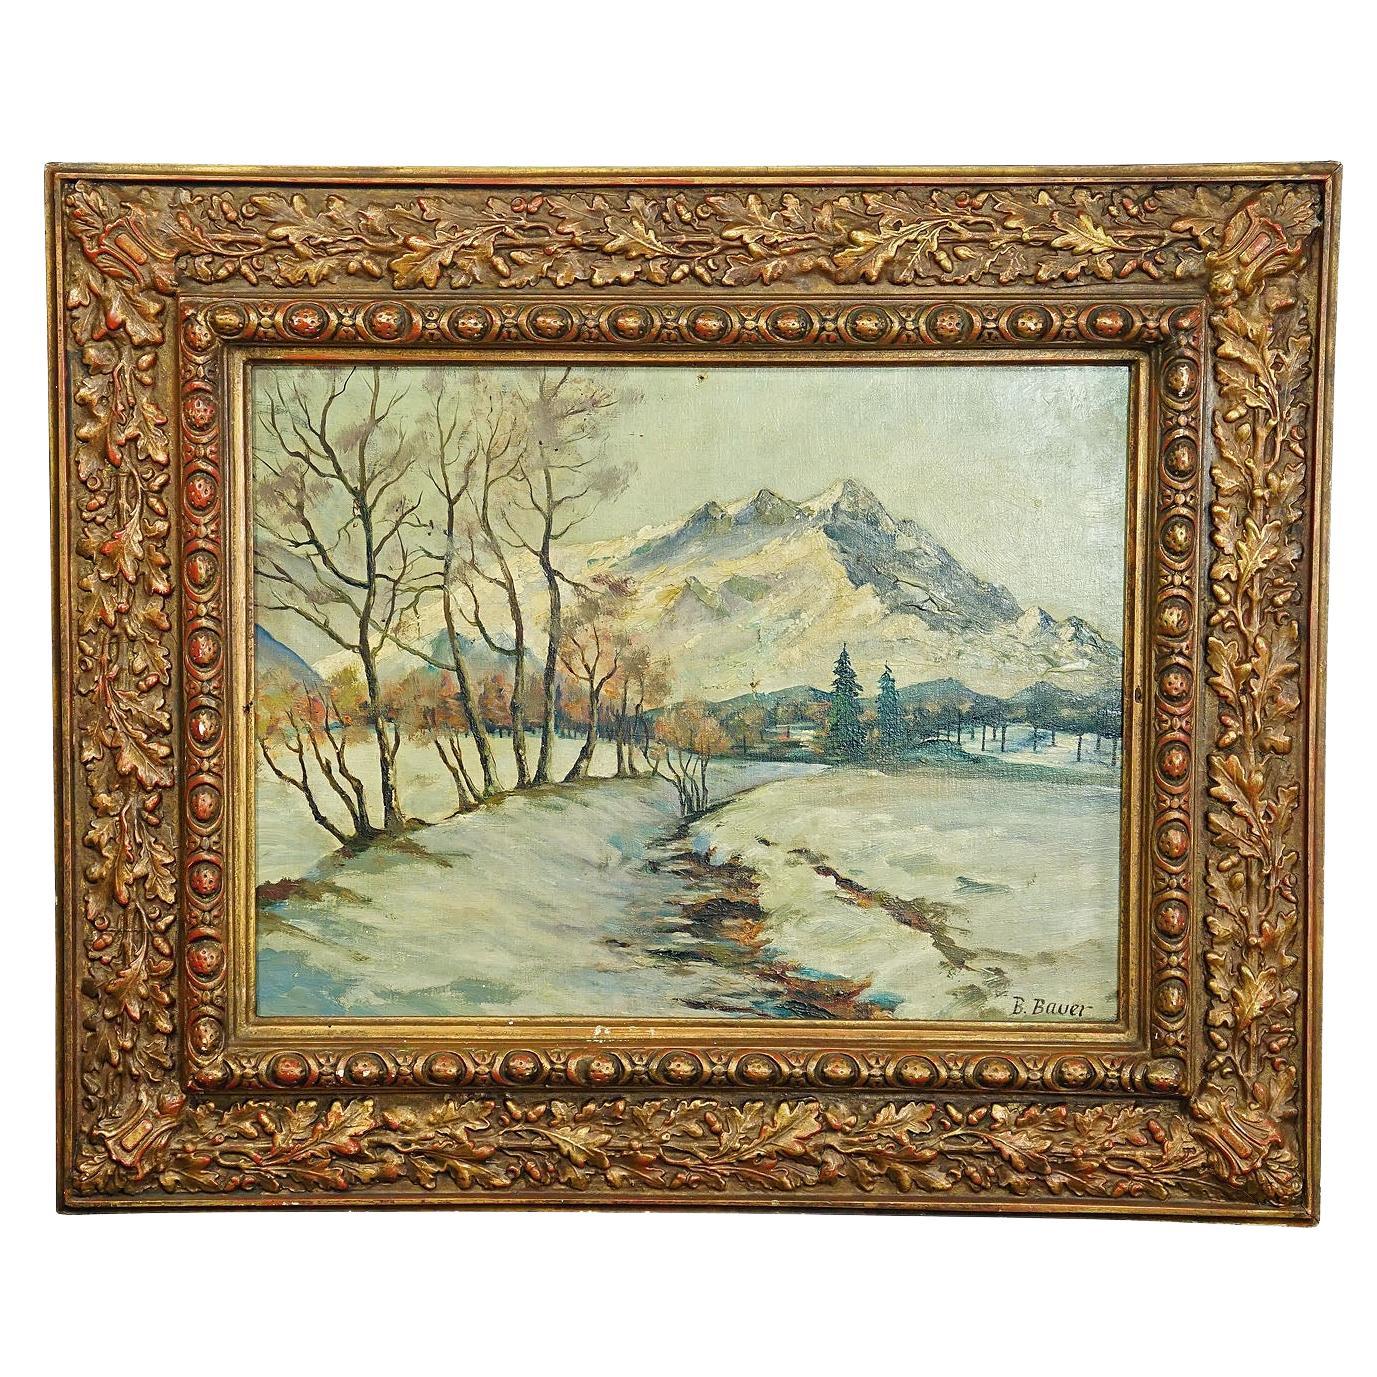 B. Bauer, Oil Painting Alpine Winter Landscape, Early 20th Century